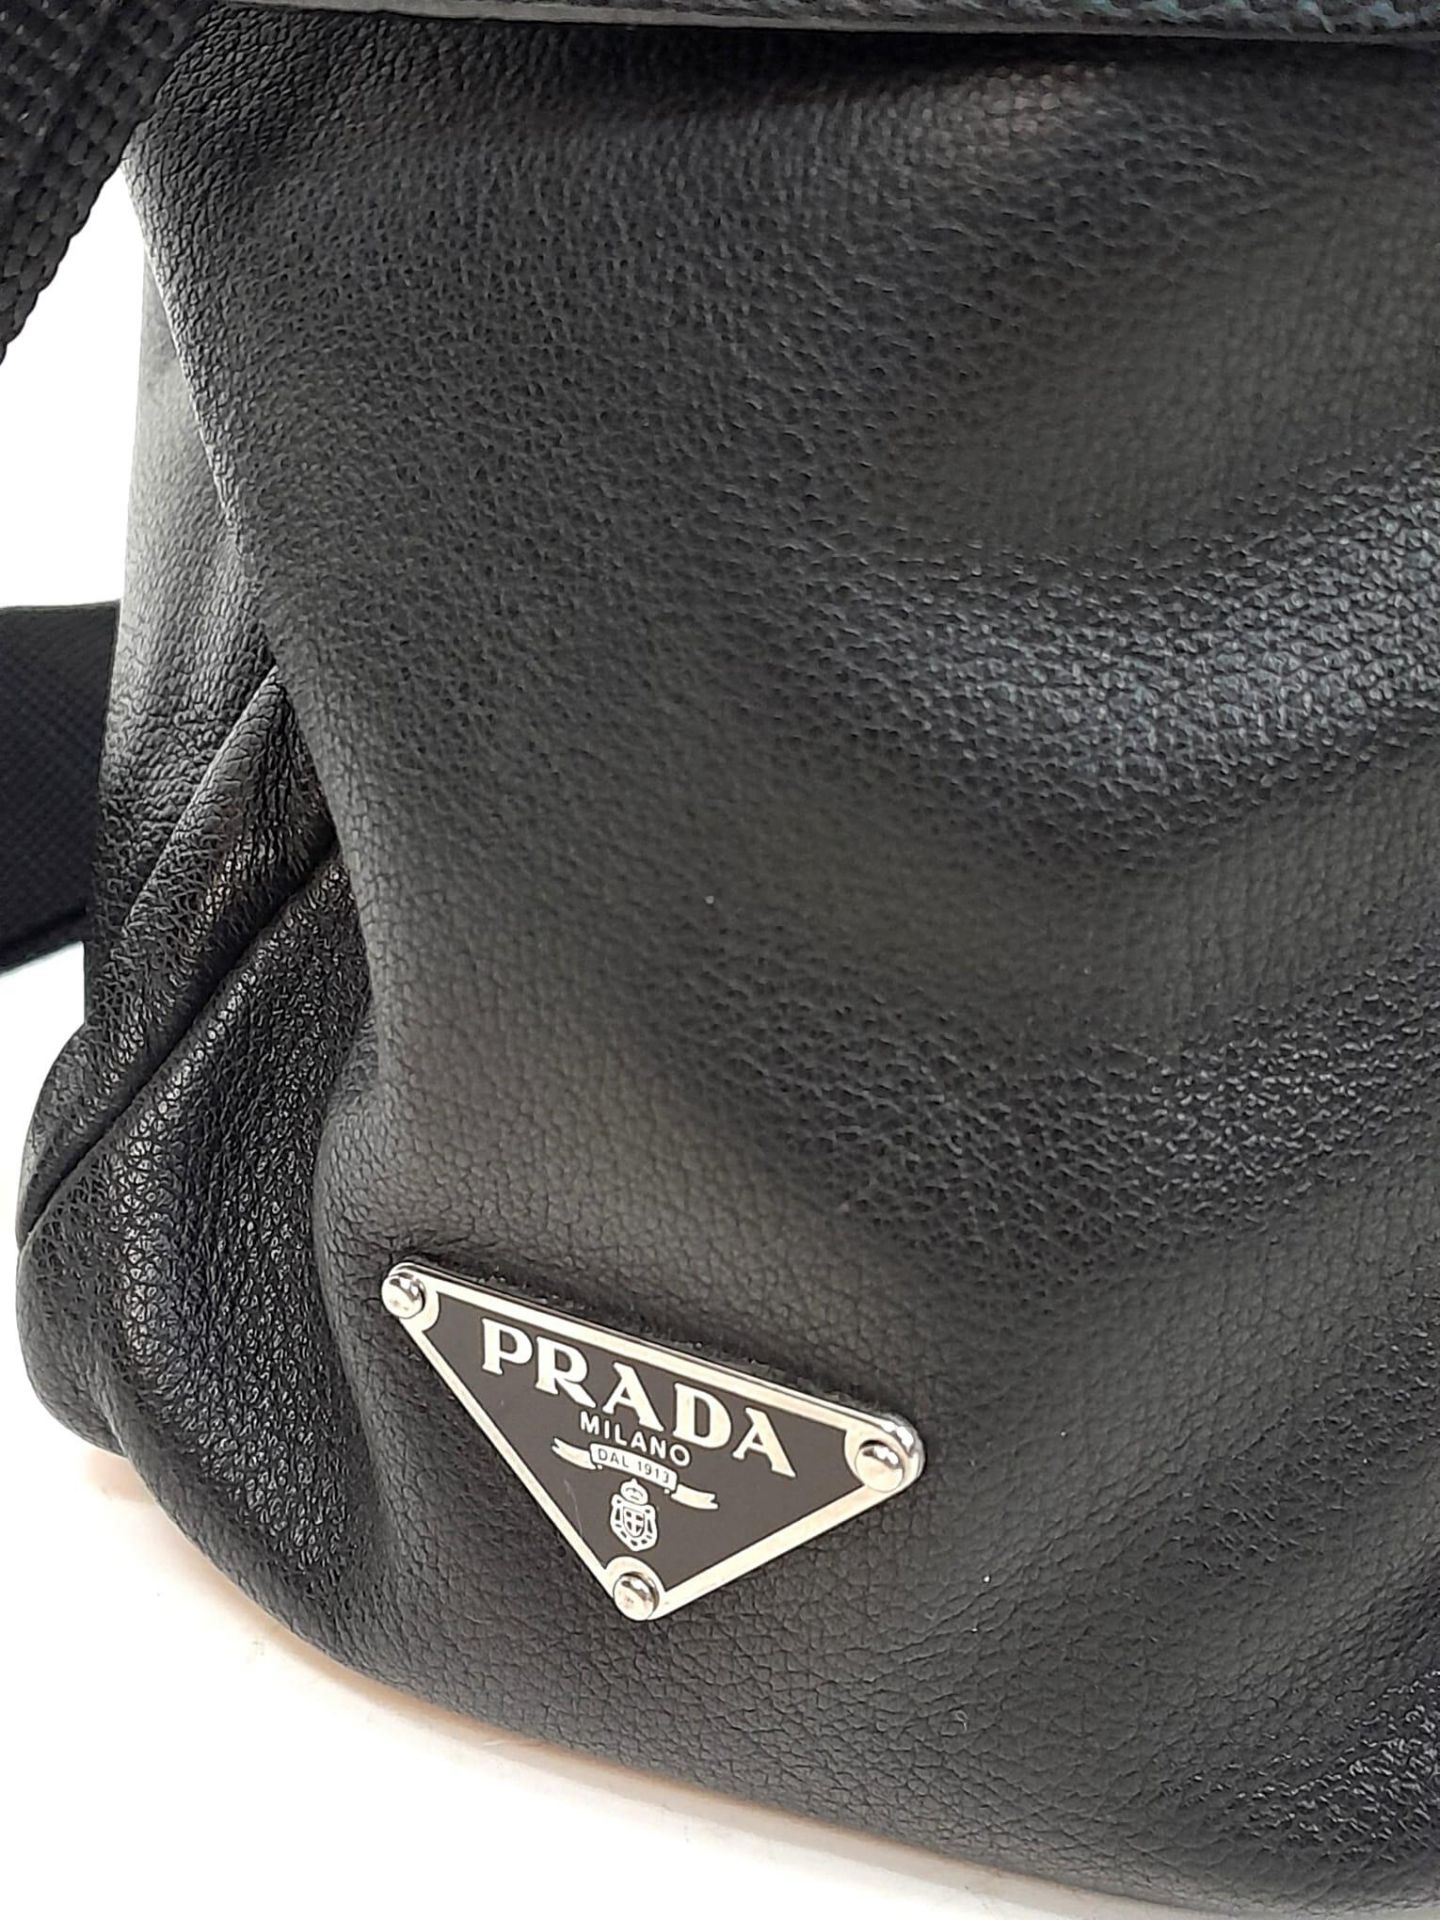 A Prada Black Duffle Bag. Leather exterior with silver-toned hardware, zipped outer compartment to - Image 7 of 12